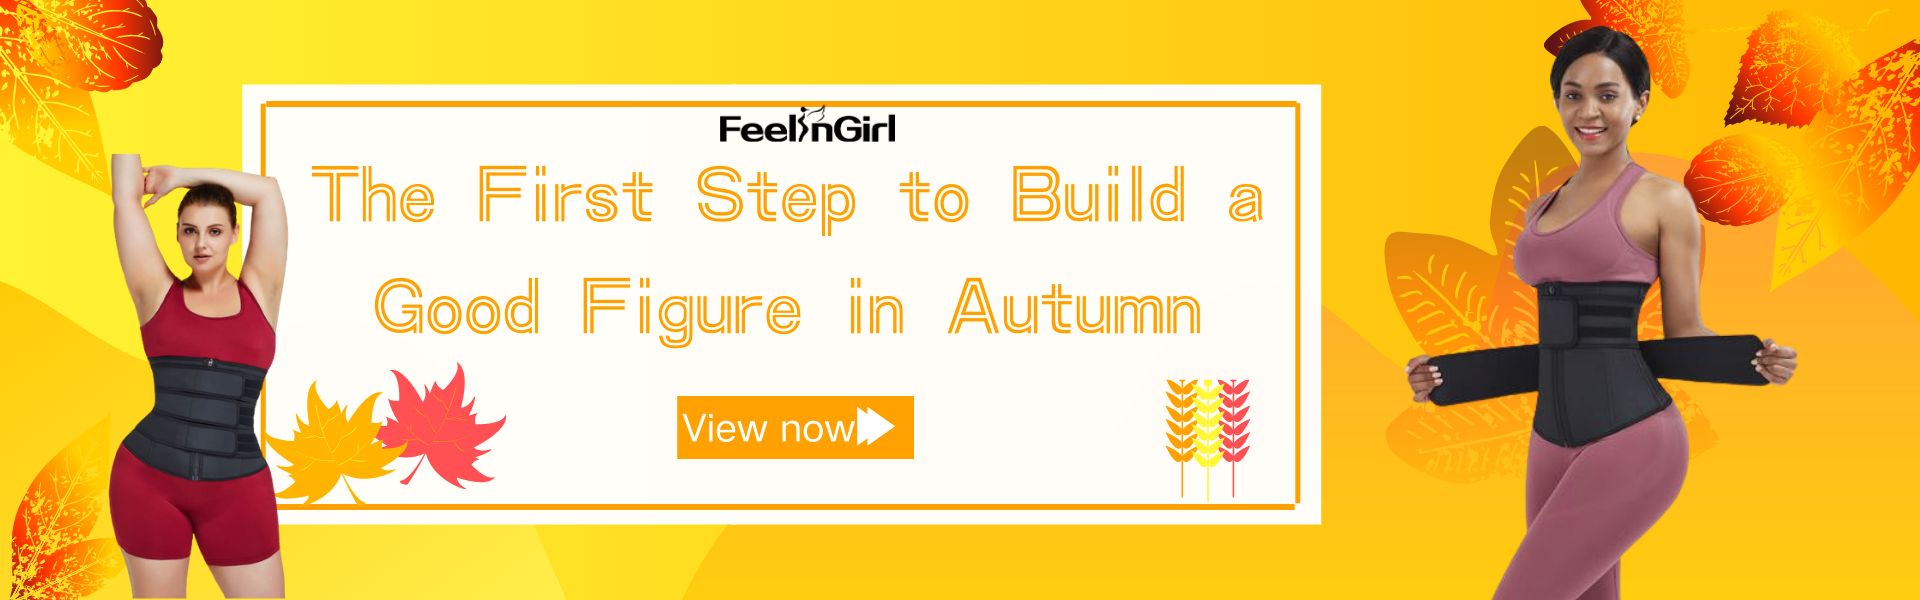 The First Step to Build a Good Figure in Autumn